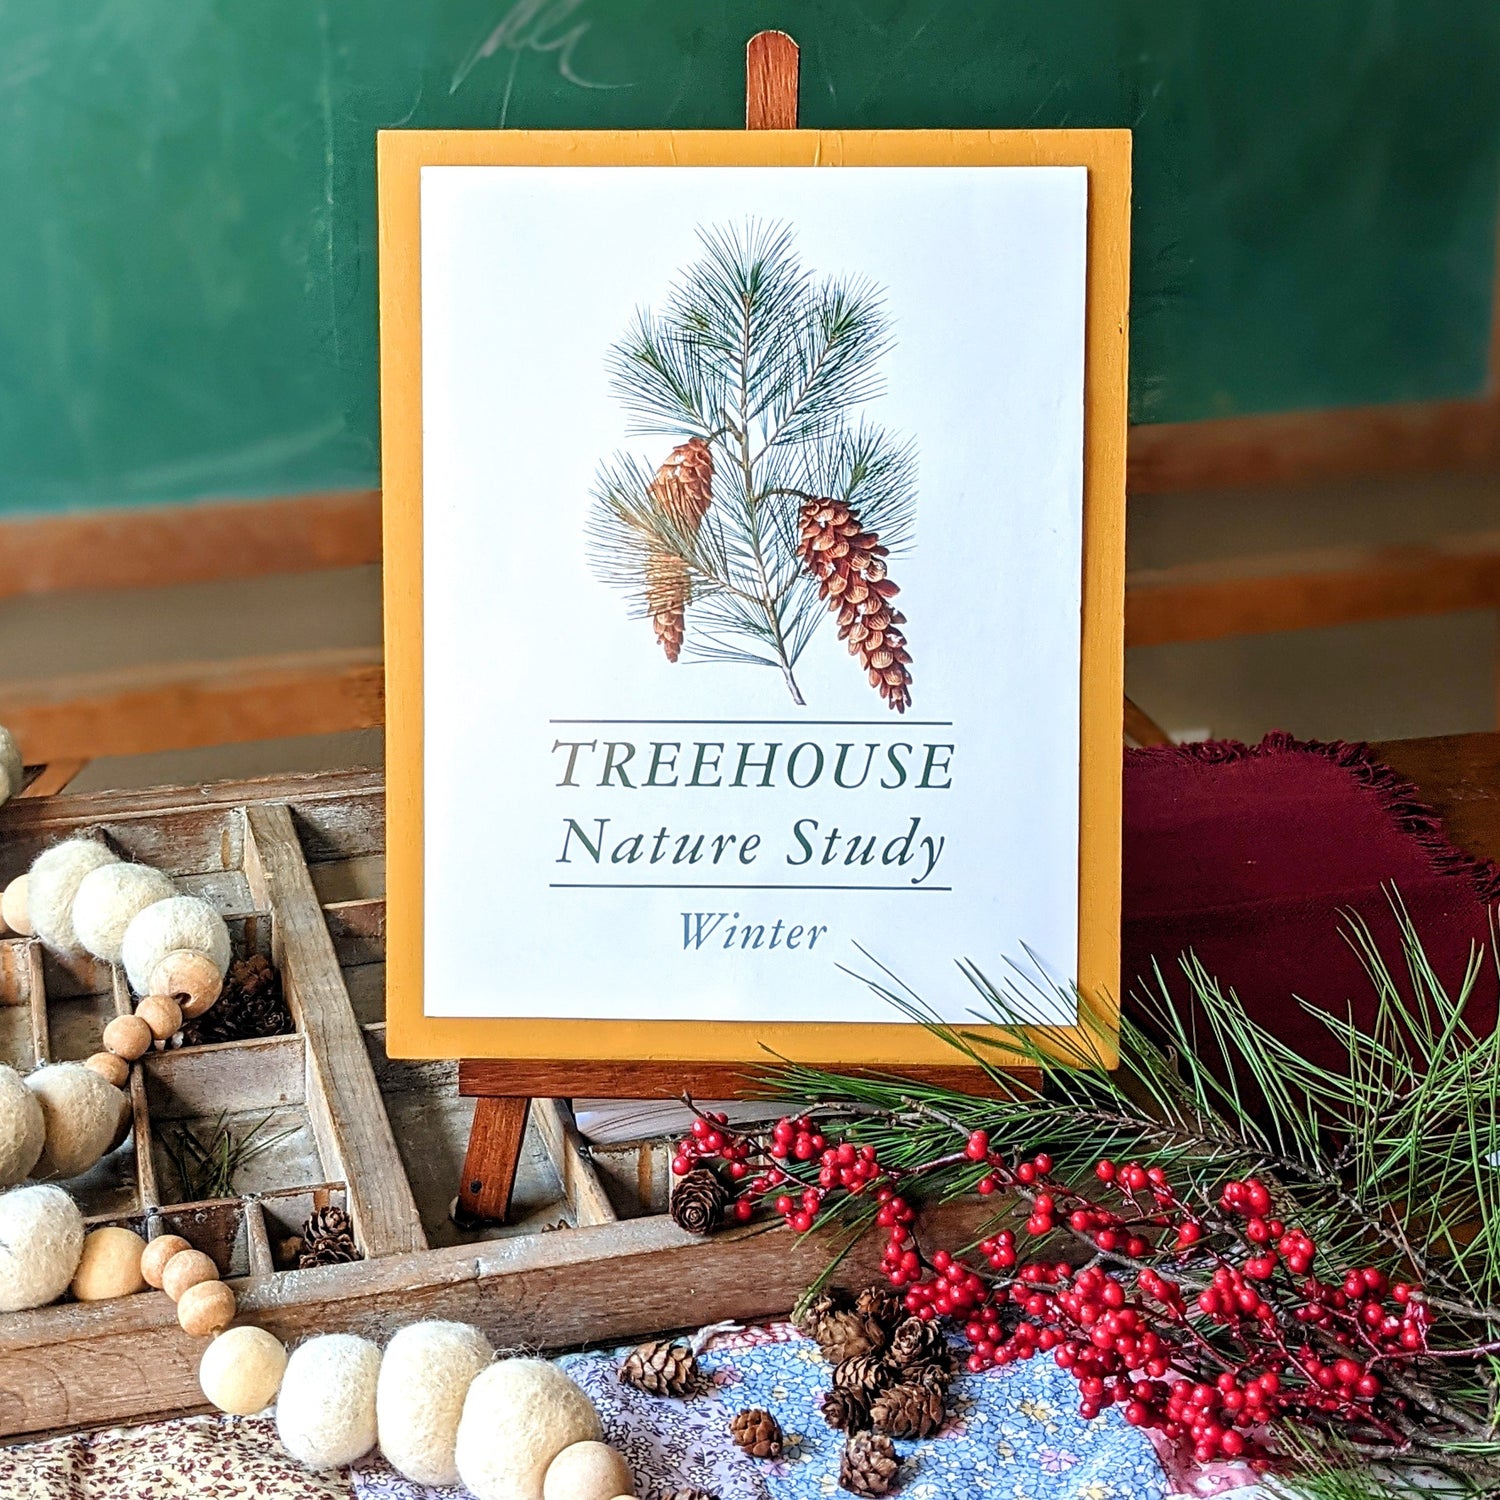 Treehouse Nature Study: Winter (Small Group License)